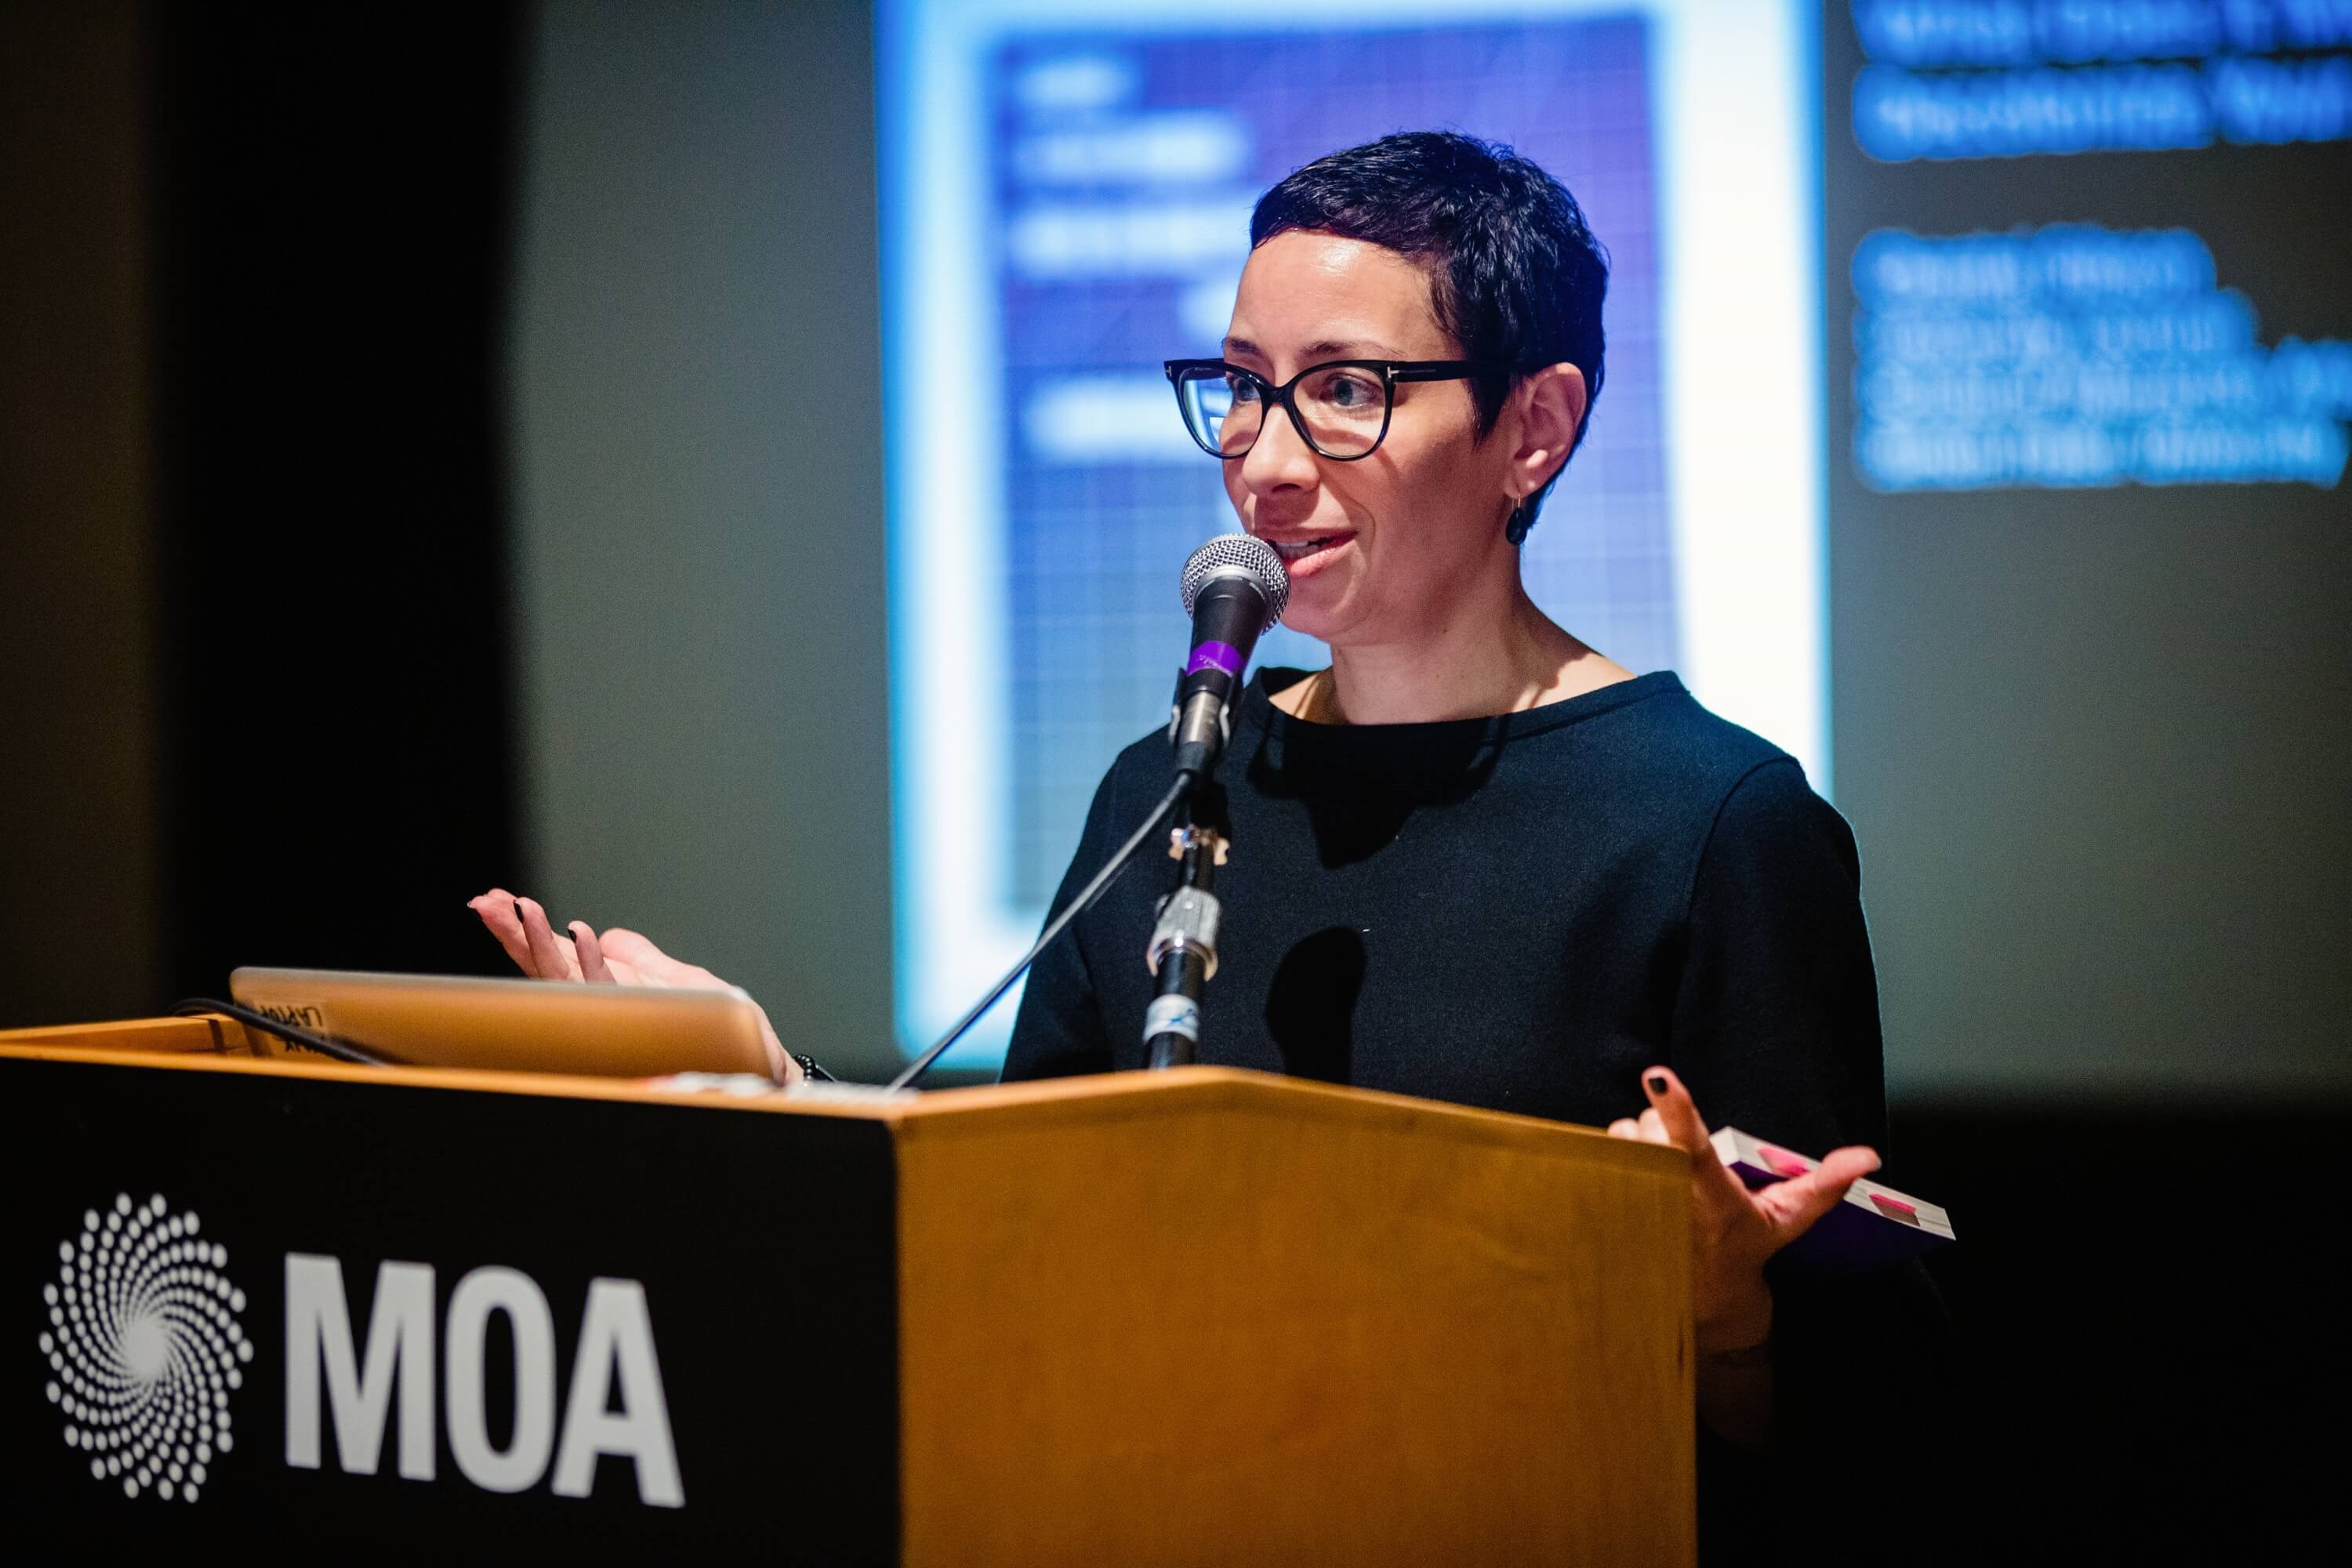 Chantal Gibson — an artist, poet and educator based in Vancouver, B.C. — speaks at the Museum of Anthropology at the University of British Columbia in February 2020. (Photo credit: Sarah Race)